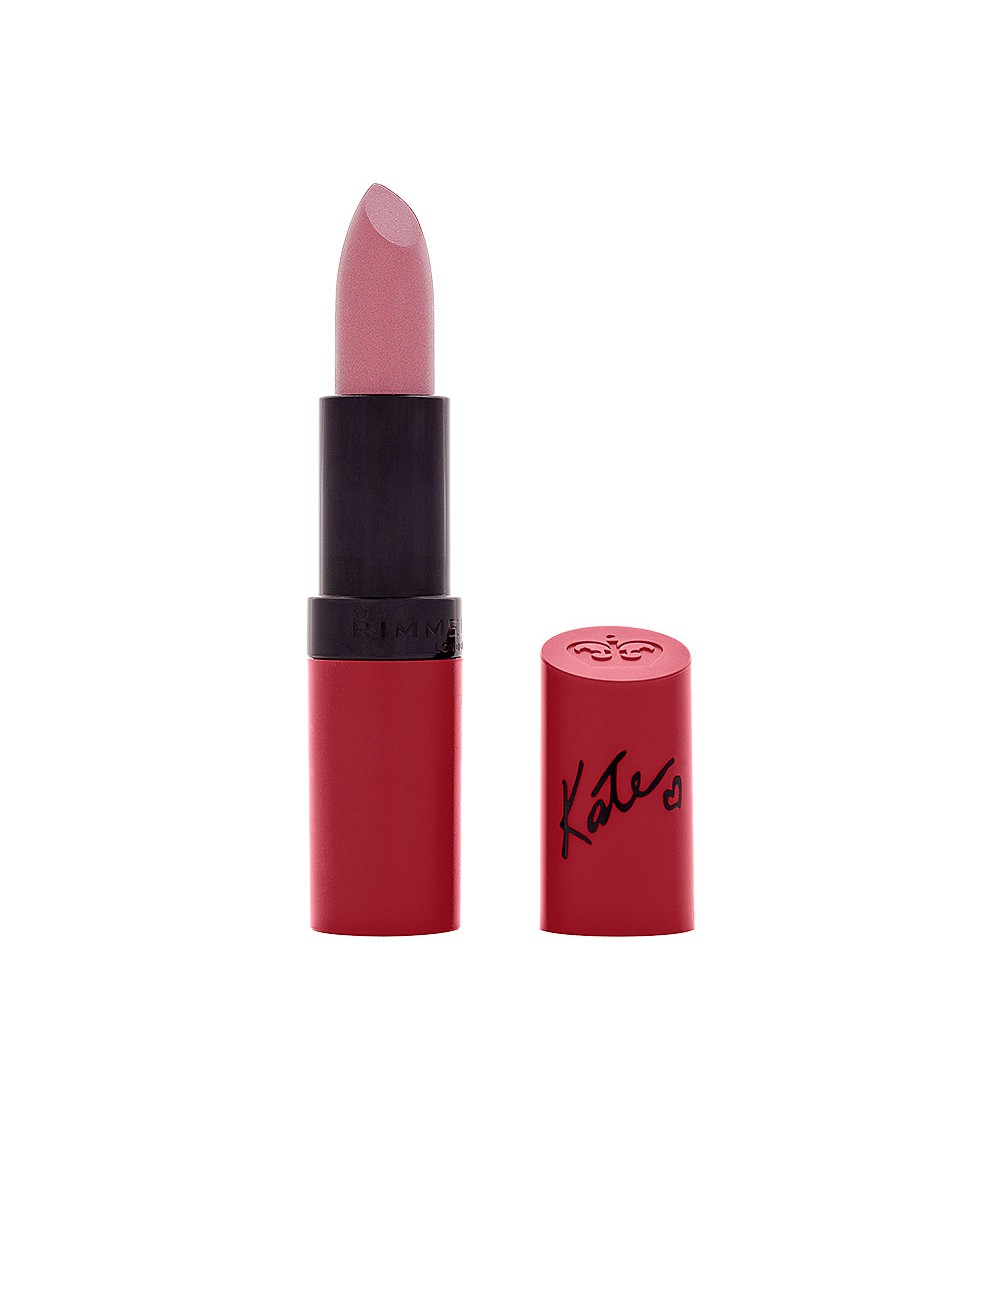 LASTING FINISH rouge à lèvres mat by Kate Moss 101-pink rose 4g